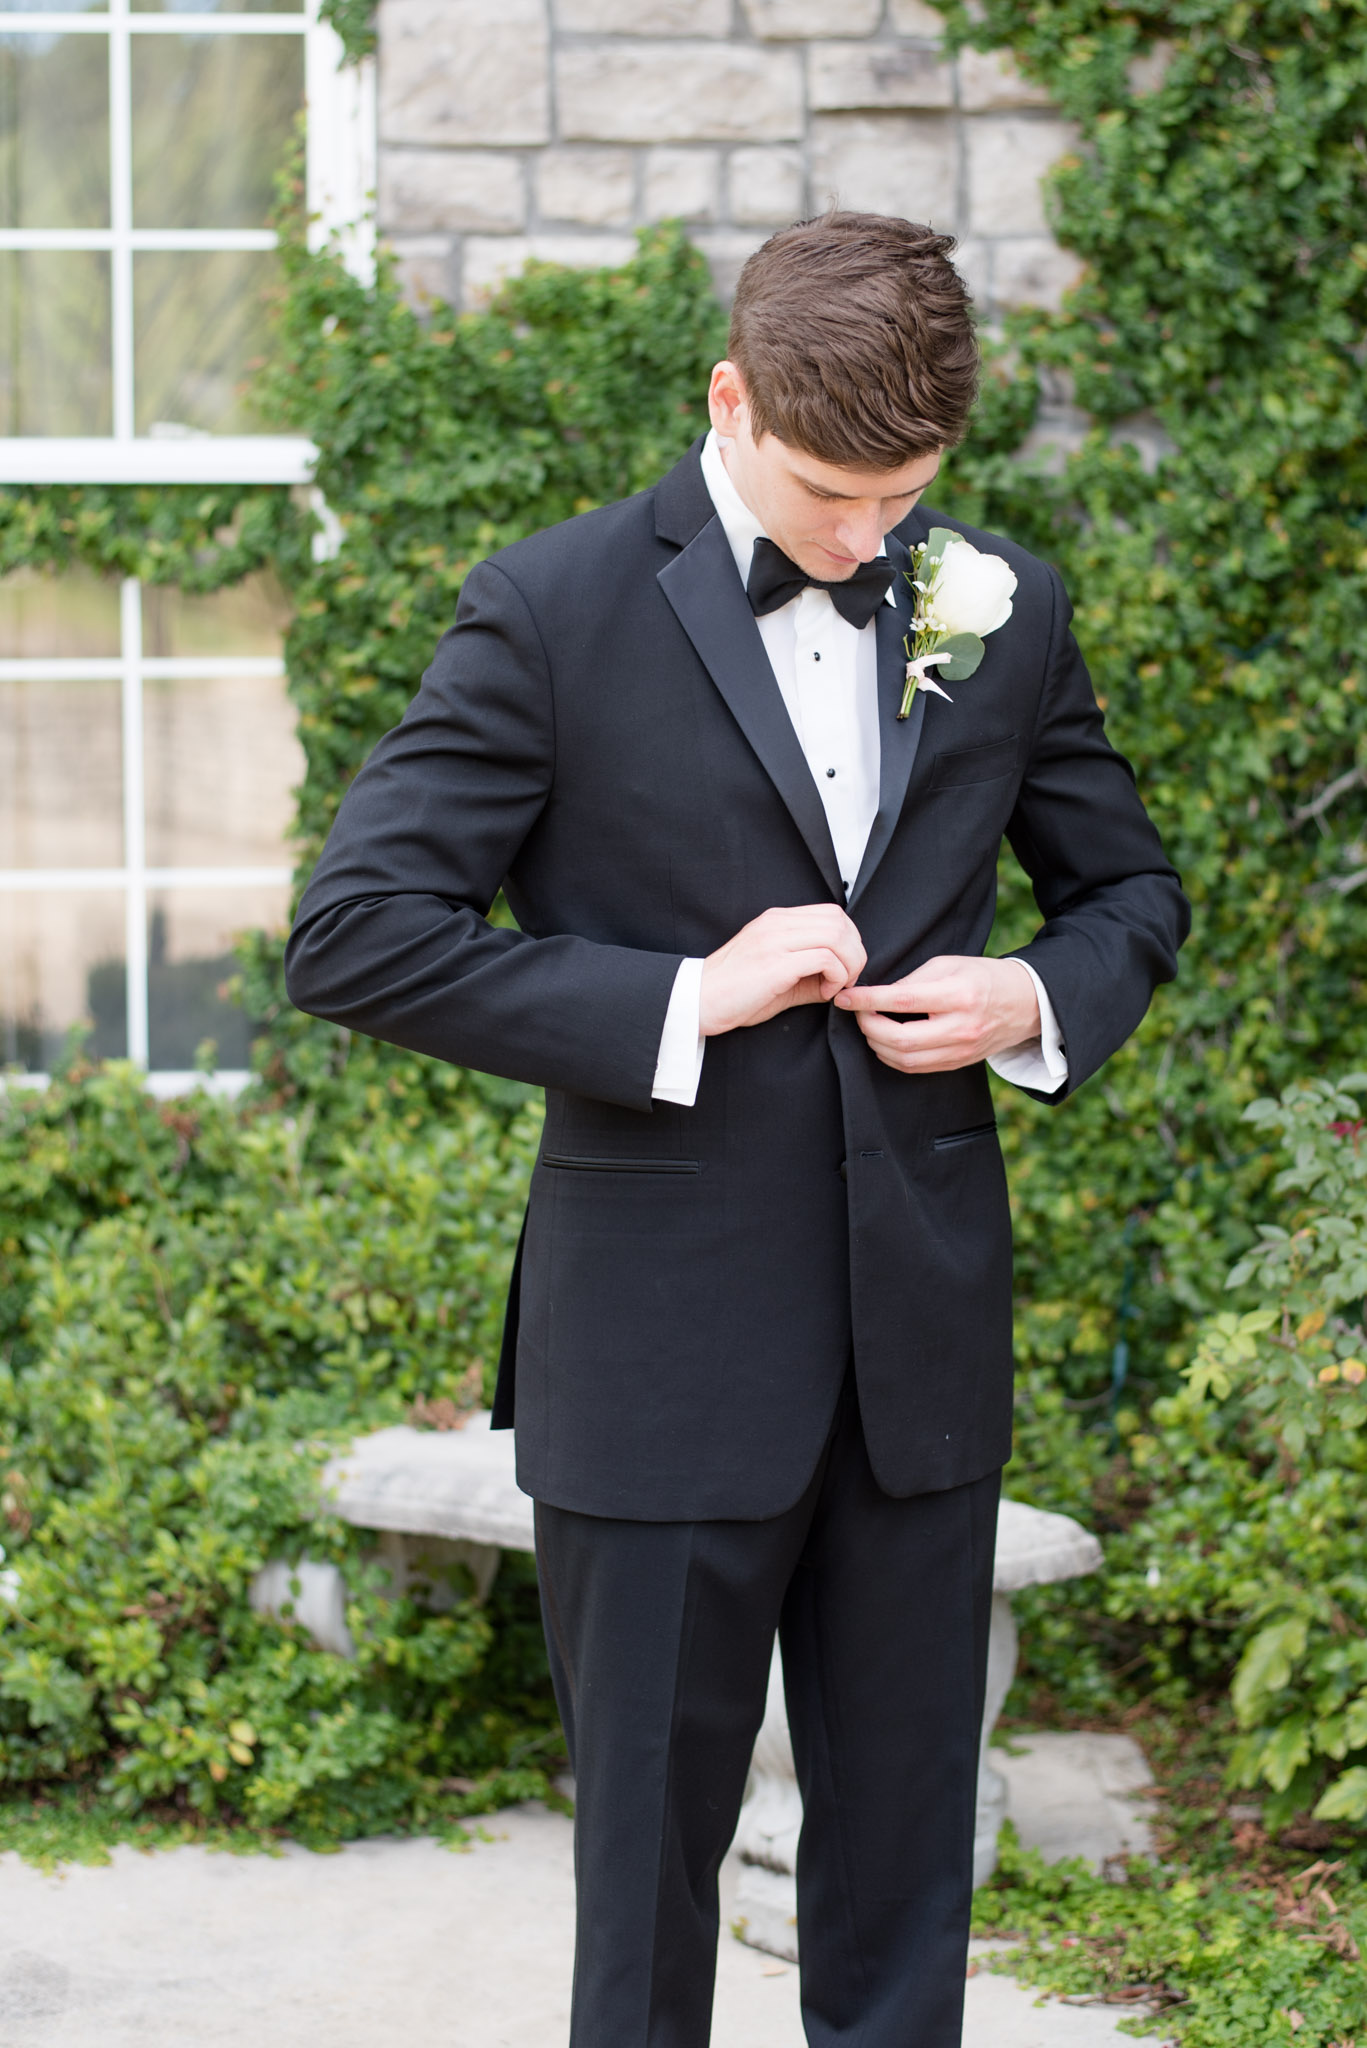 Groom buttons tux jacket.